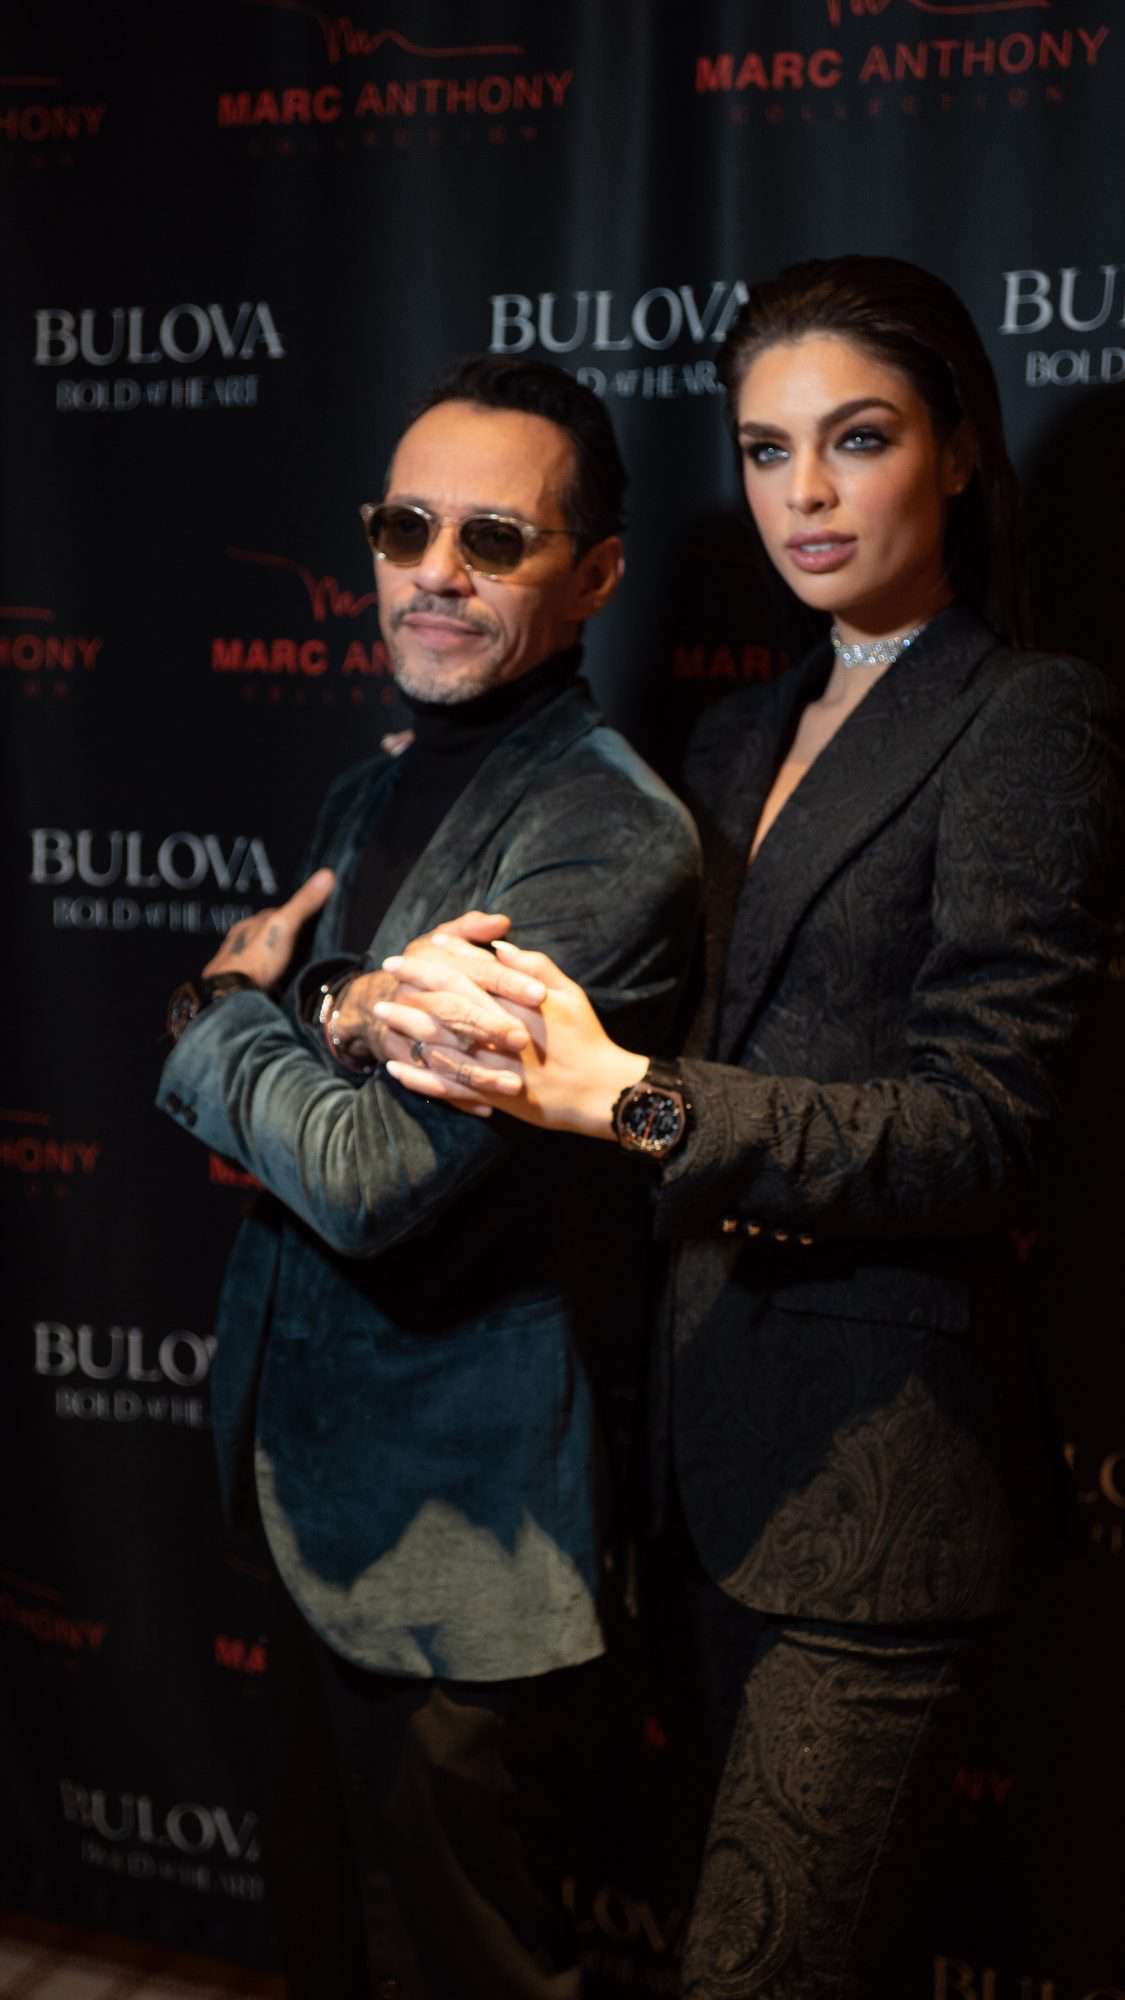 Marc hosted his closest friends last night to preview the collection ahead of the Latin Grammy’s, in addition to the world premiere of the collection’s collaborative “Bold at Heart” campaign with Bulova.